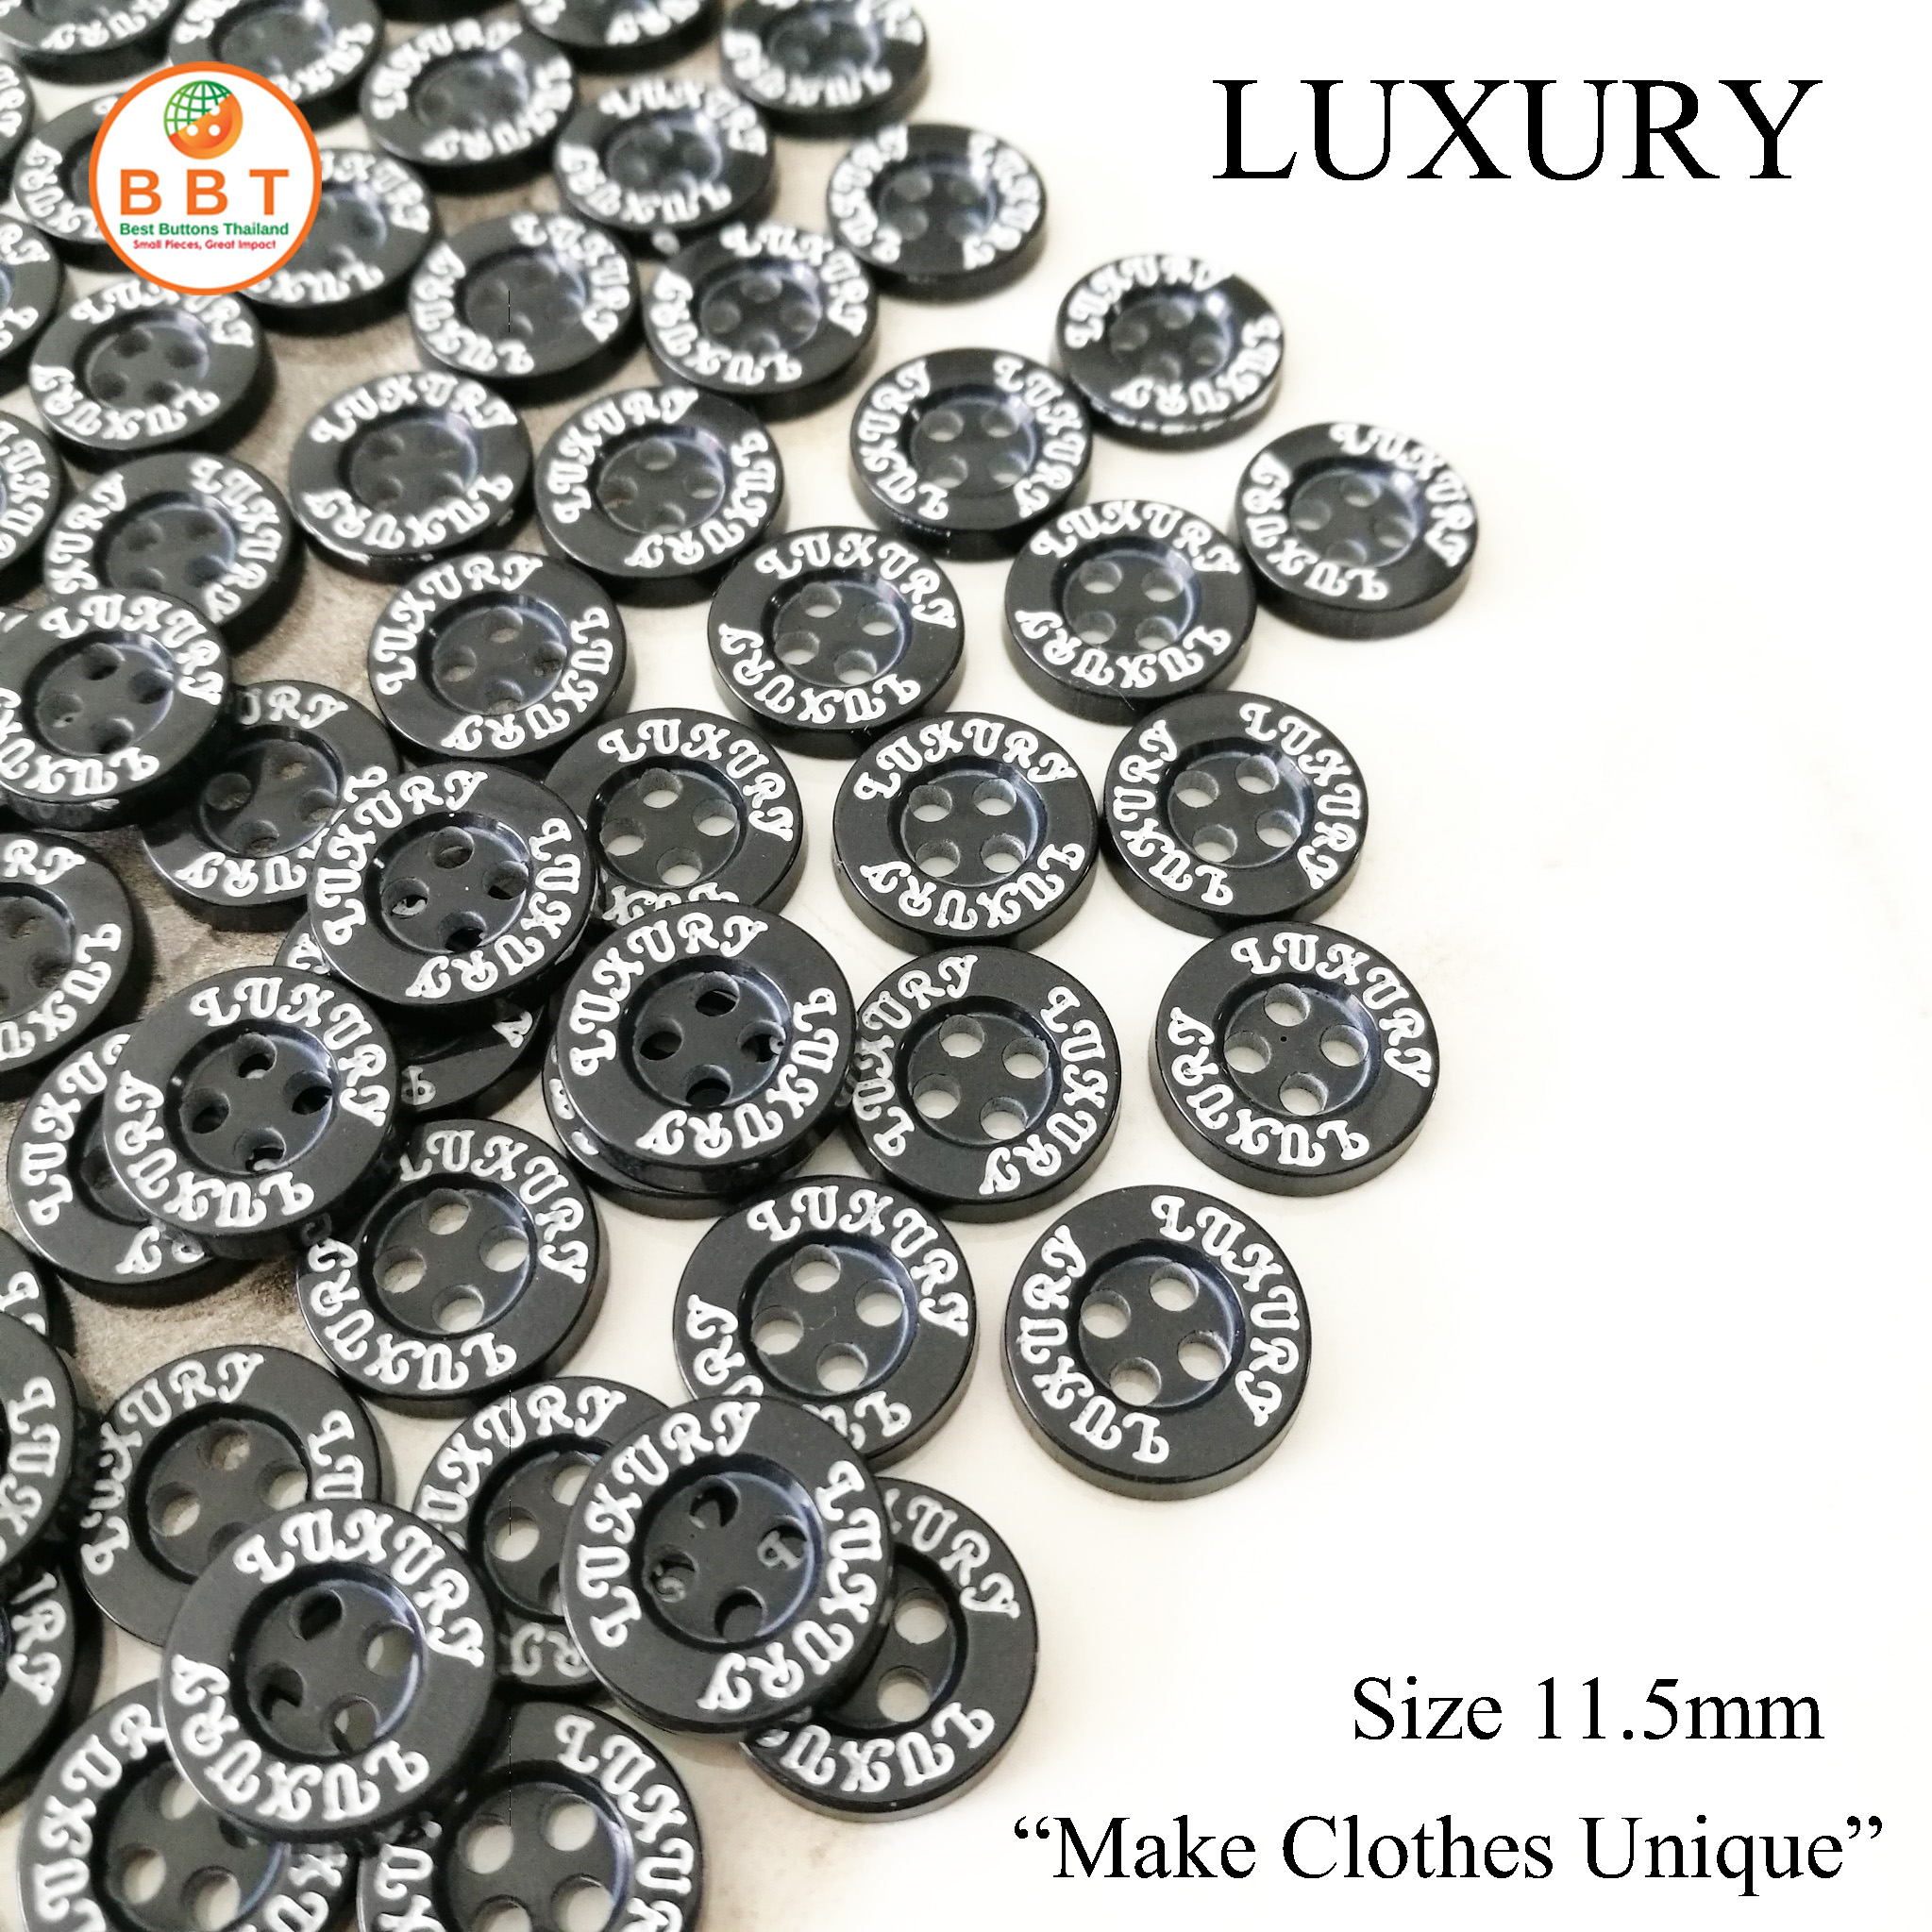 Engraving Buttons "Luxury" in Black Buttons